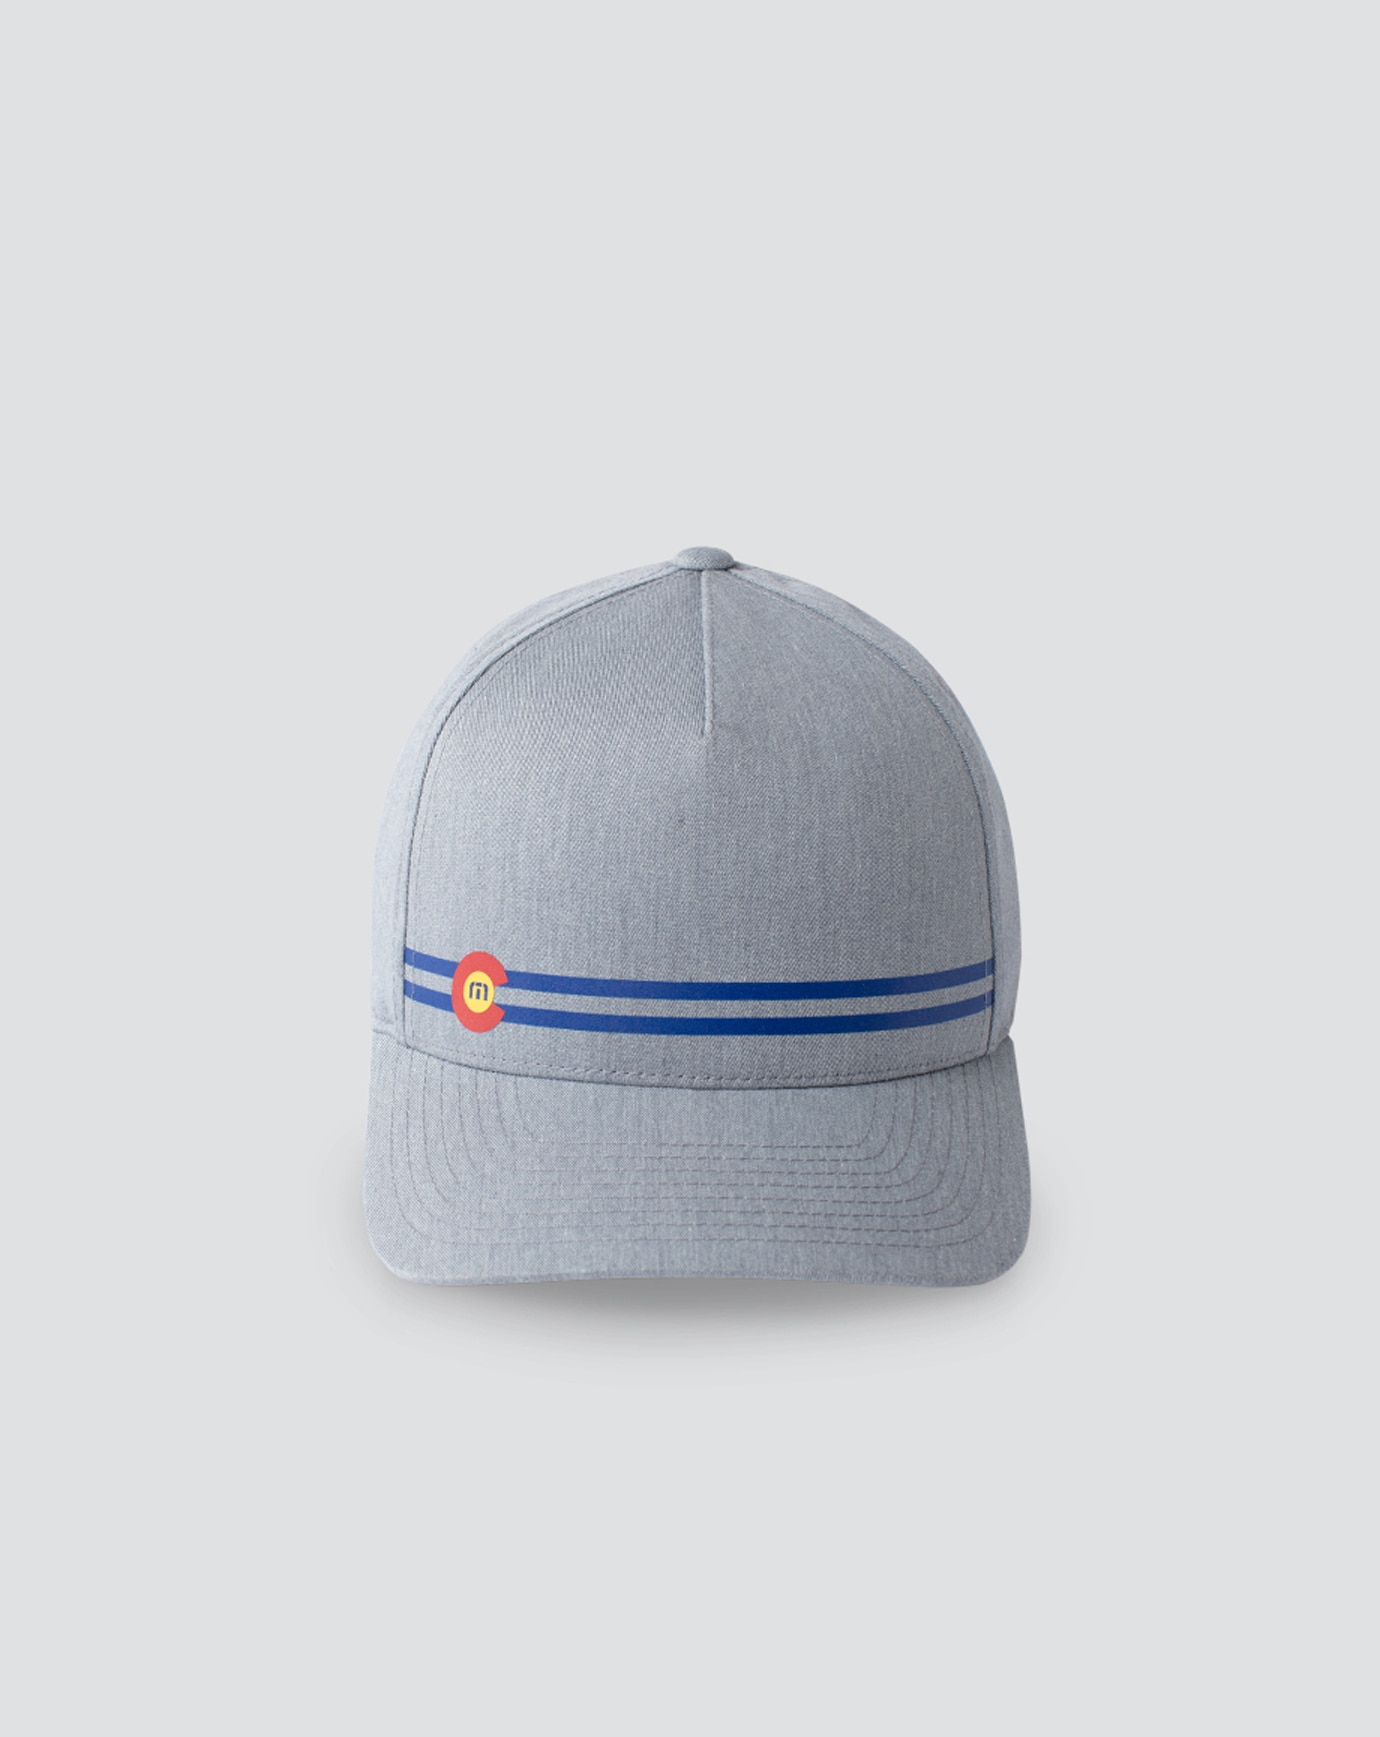 Related Product - SIDE CUT SNAPBACK HAT